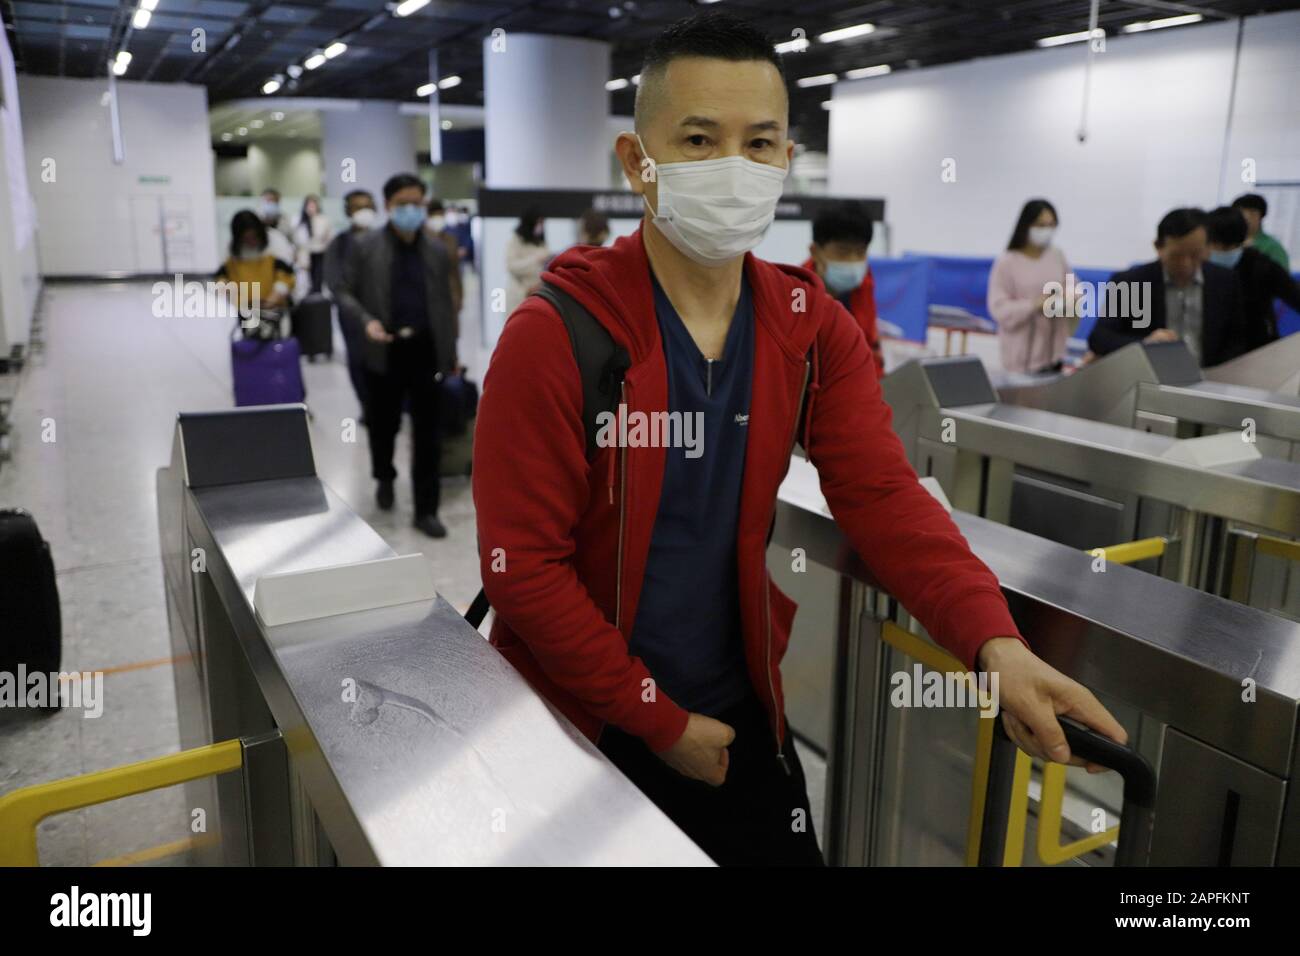 January 23, 2020, Hong Kong: Visitor from China Mainland exit from the gate at HIGH SPEED RAIL Hong Kong Terminal. An outbreak of new type of pneumonia associated with novel coronavirus have put Hong Kong on high alert, passengers from China Mainland are advised to wear masks to prevent germs from spreading on train and on aeroplane. Meanwhile PRC government have announced that all flights and trains leaving City of Wuhan, has been temporarily put to a halt, provincial citizens are not allowed to leave the plague-stricken City. Jan-23, 2020 Hong Kong.ZUMA/Liau Chung-ren (Credit Image: © Stock Photo